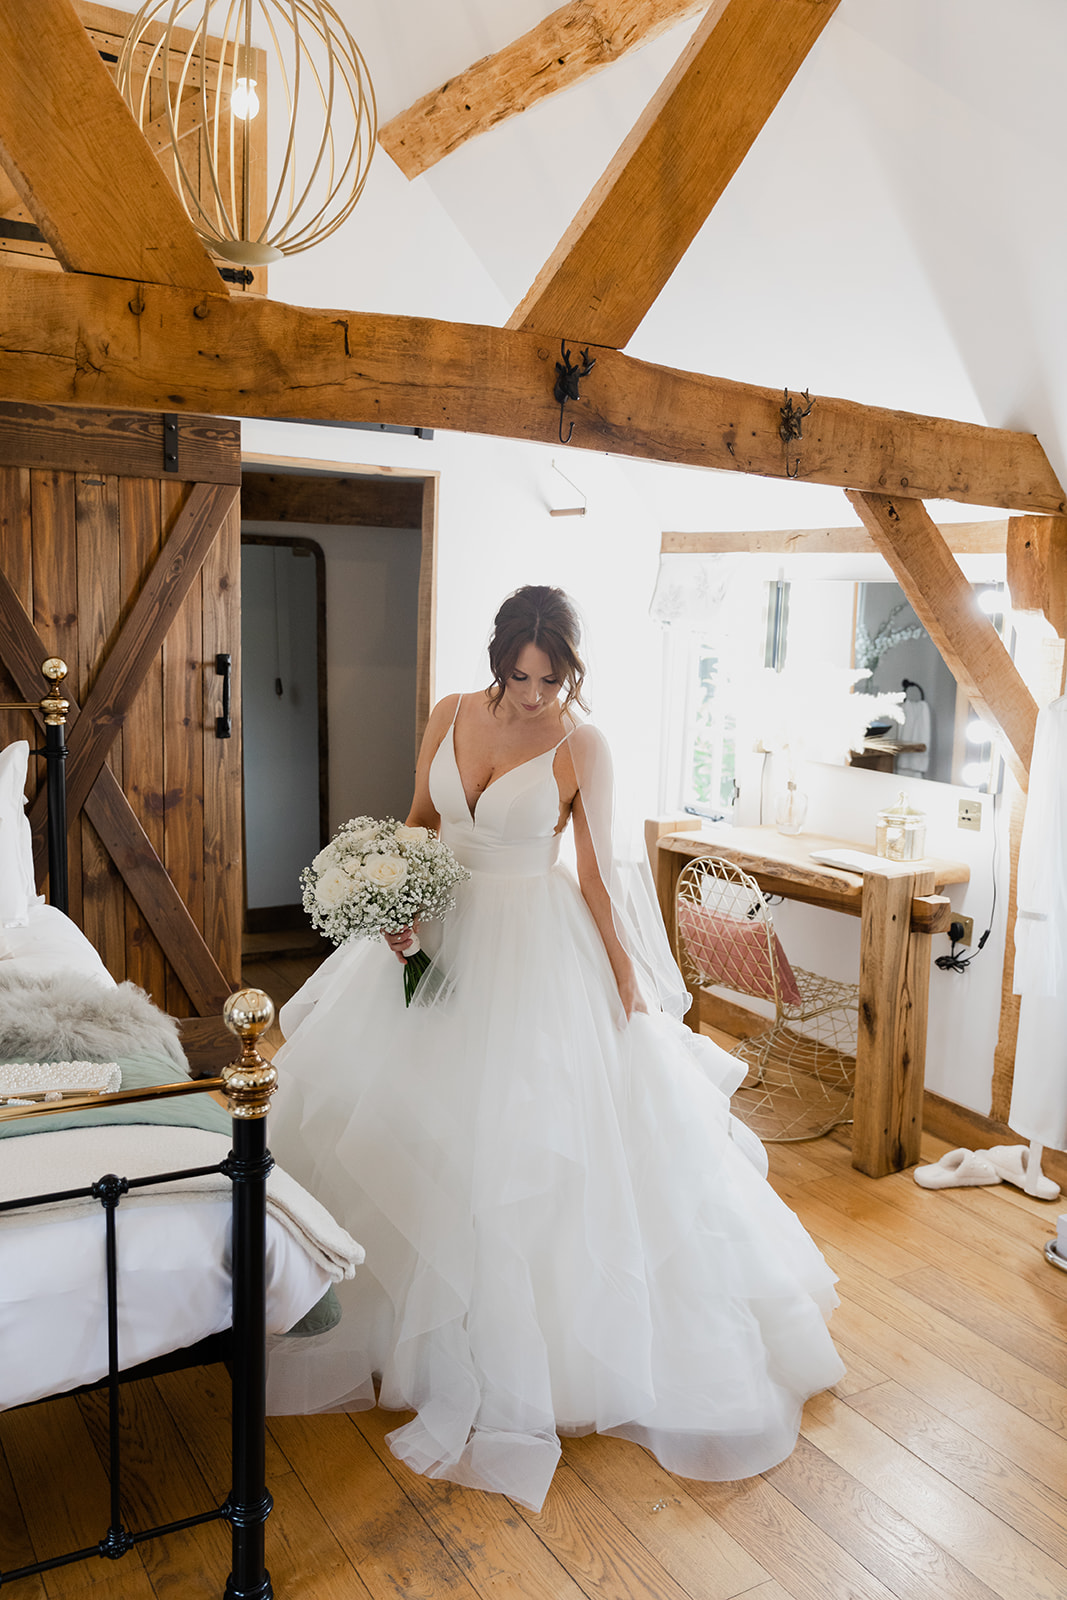 Bride getting ready at Silchester Farm wedding in Hampshire